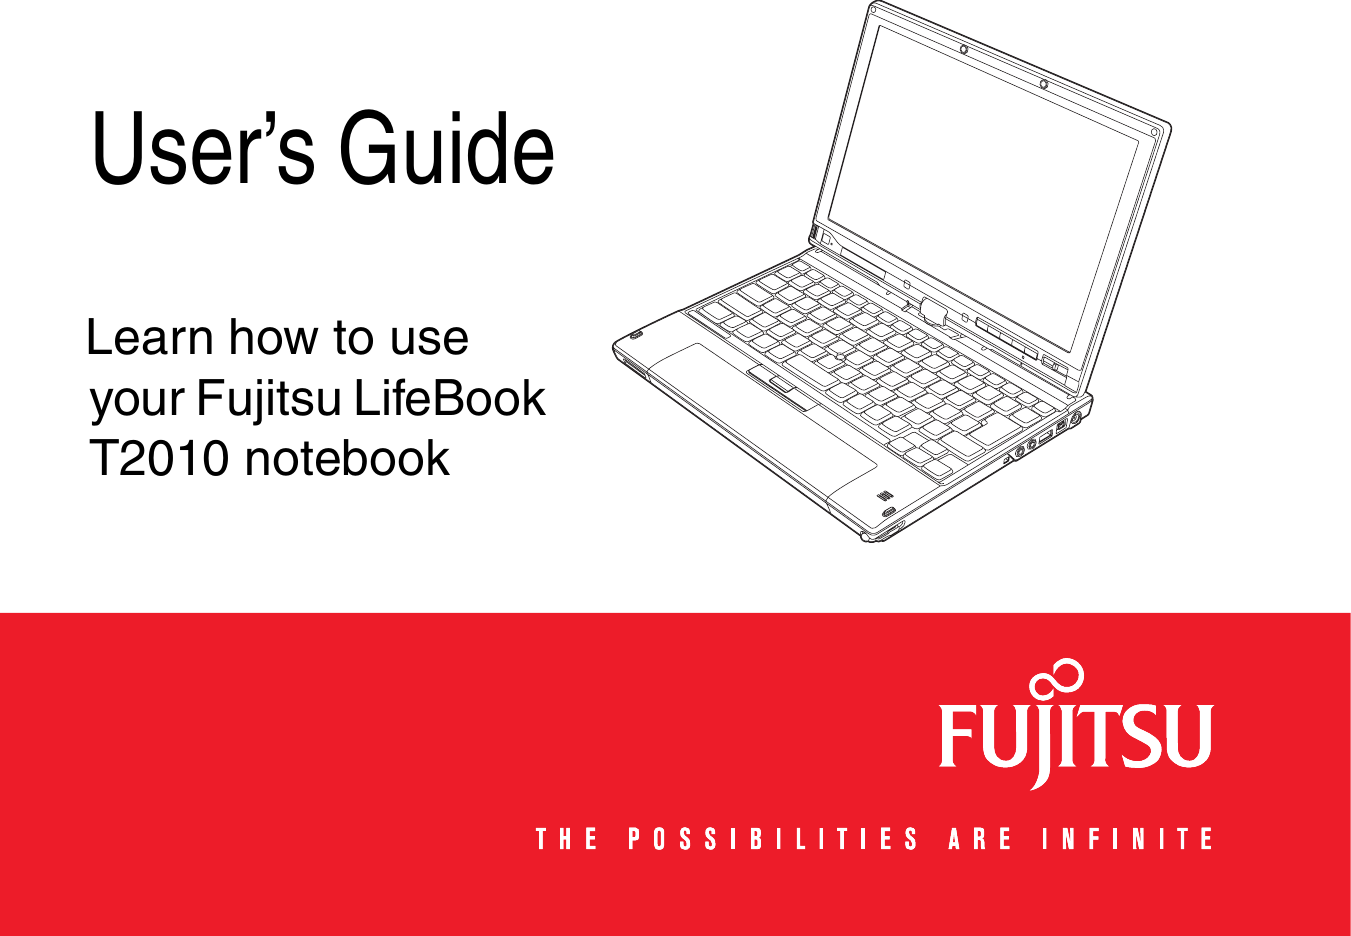   User’s GuideLearn how to use your Fujitsu LifeBook T2010 notebook